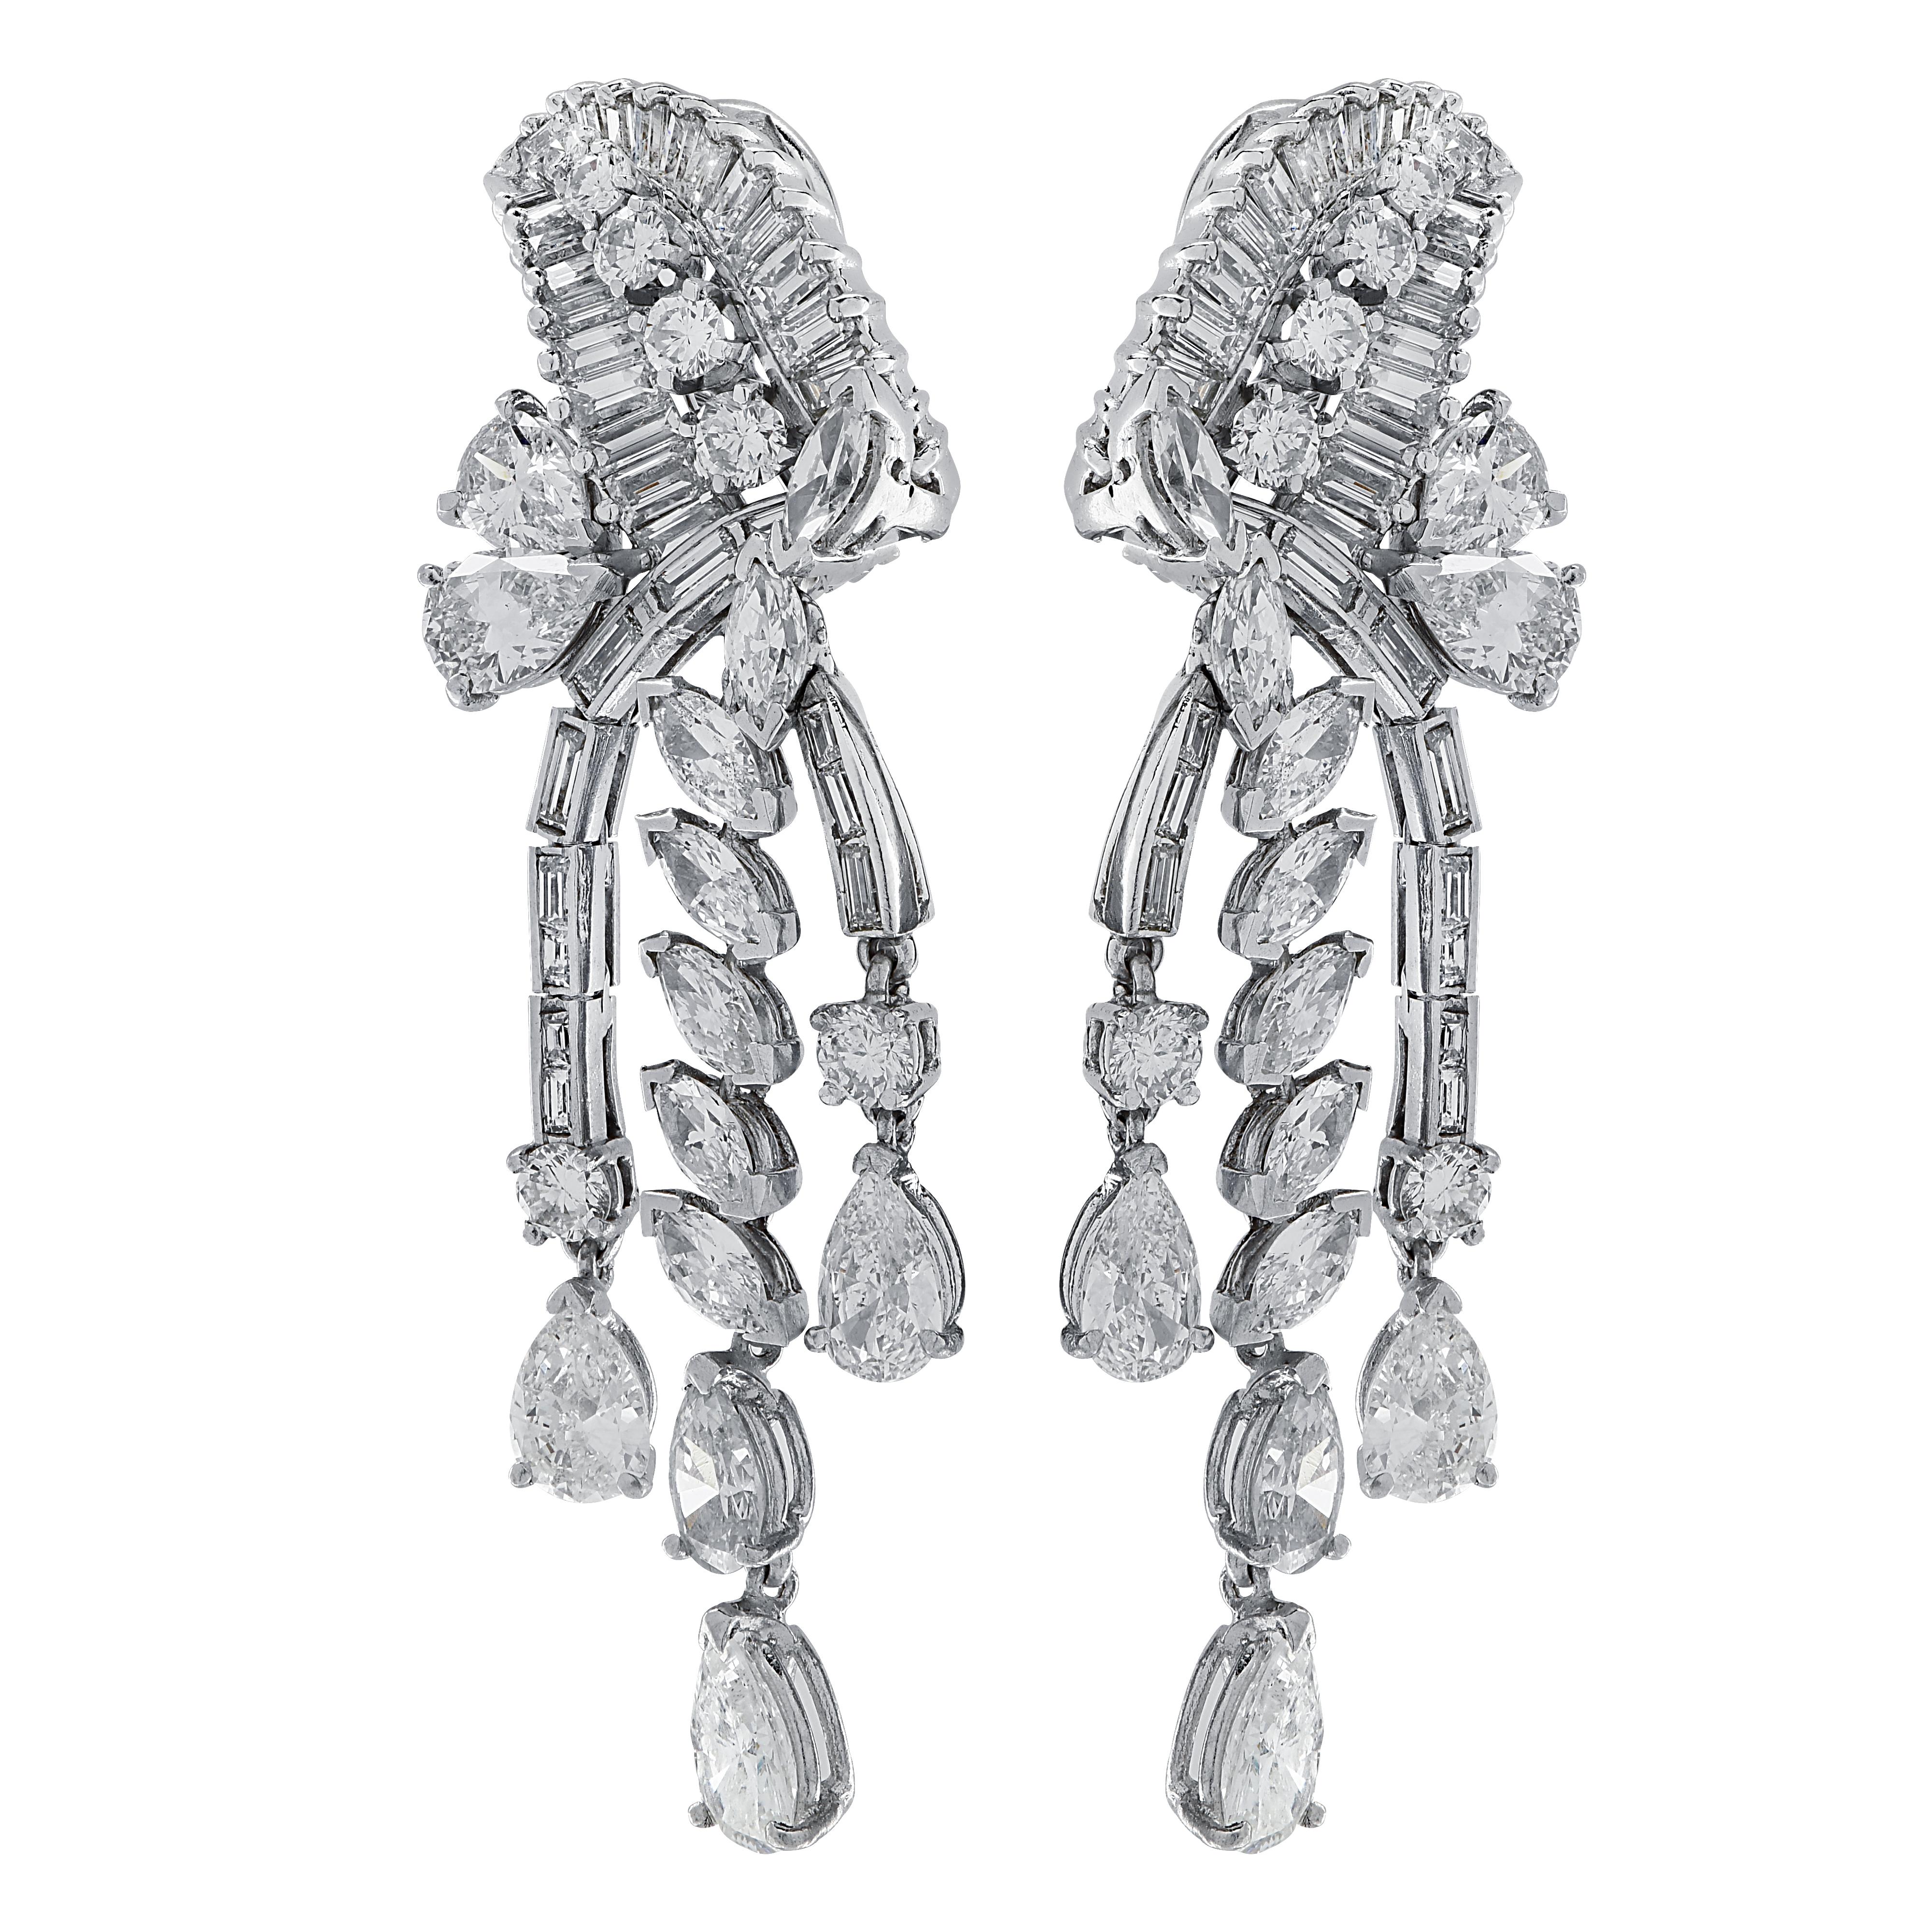 Sensational clip-on dangle earrings crafted in platinum, showcasing 147 mixed cut diamonds weighing approximately 12.65 carats total. 12 pear shape diamonds weighing approximately 6.40 carats total, 10 round brilliant cut diamonds weighing